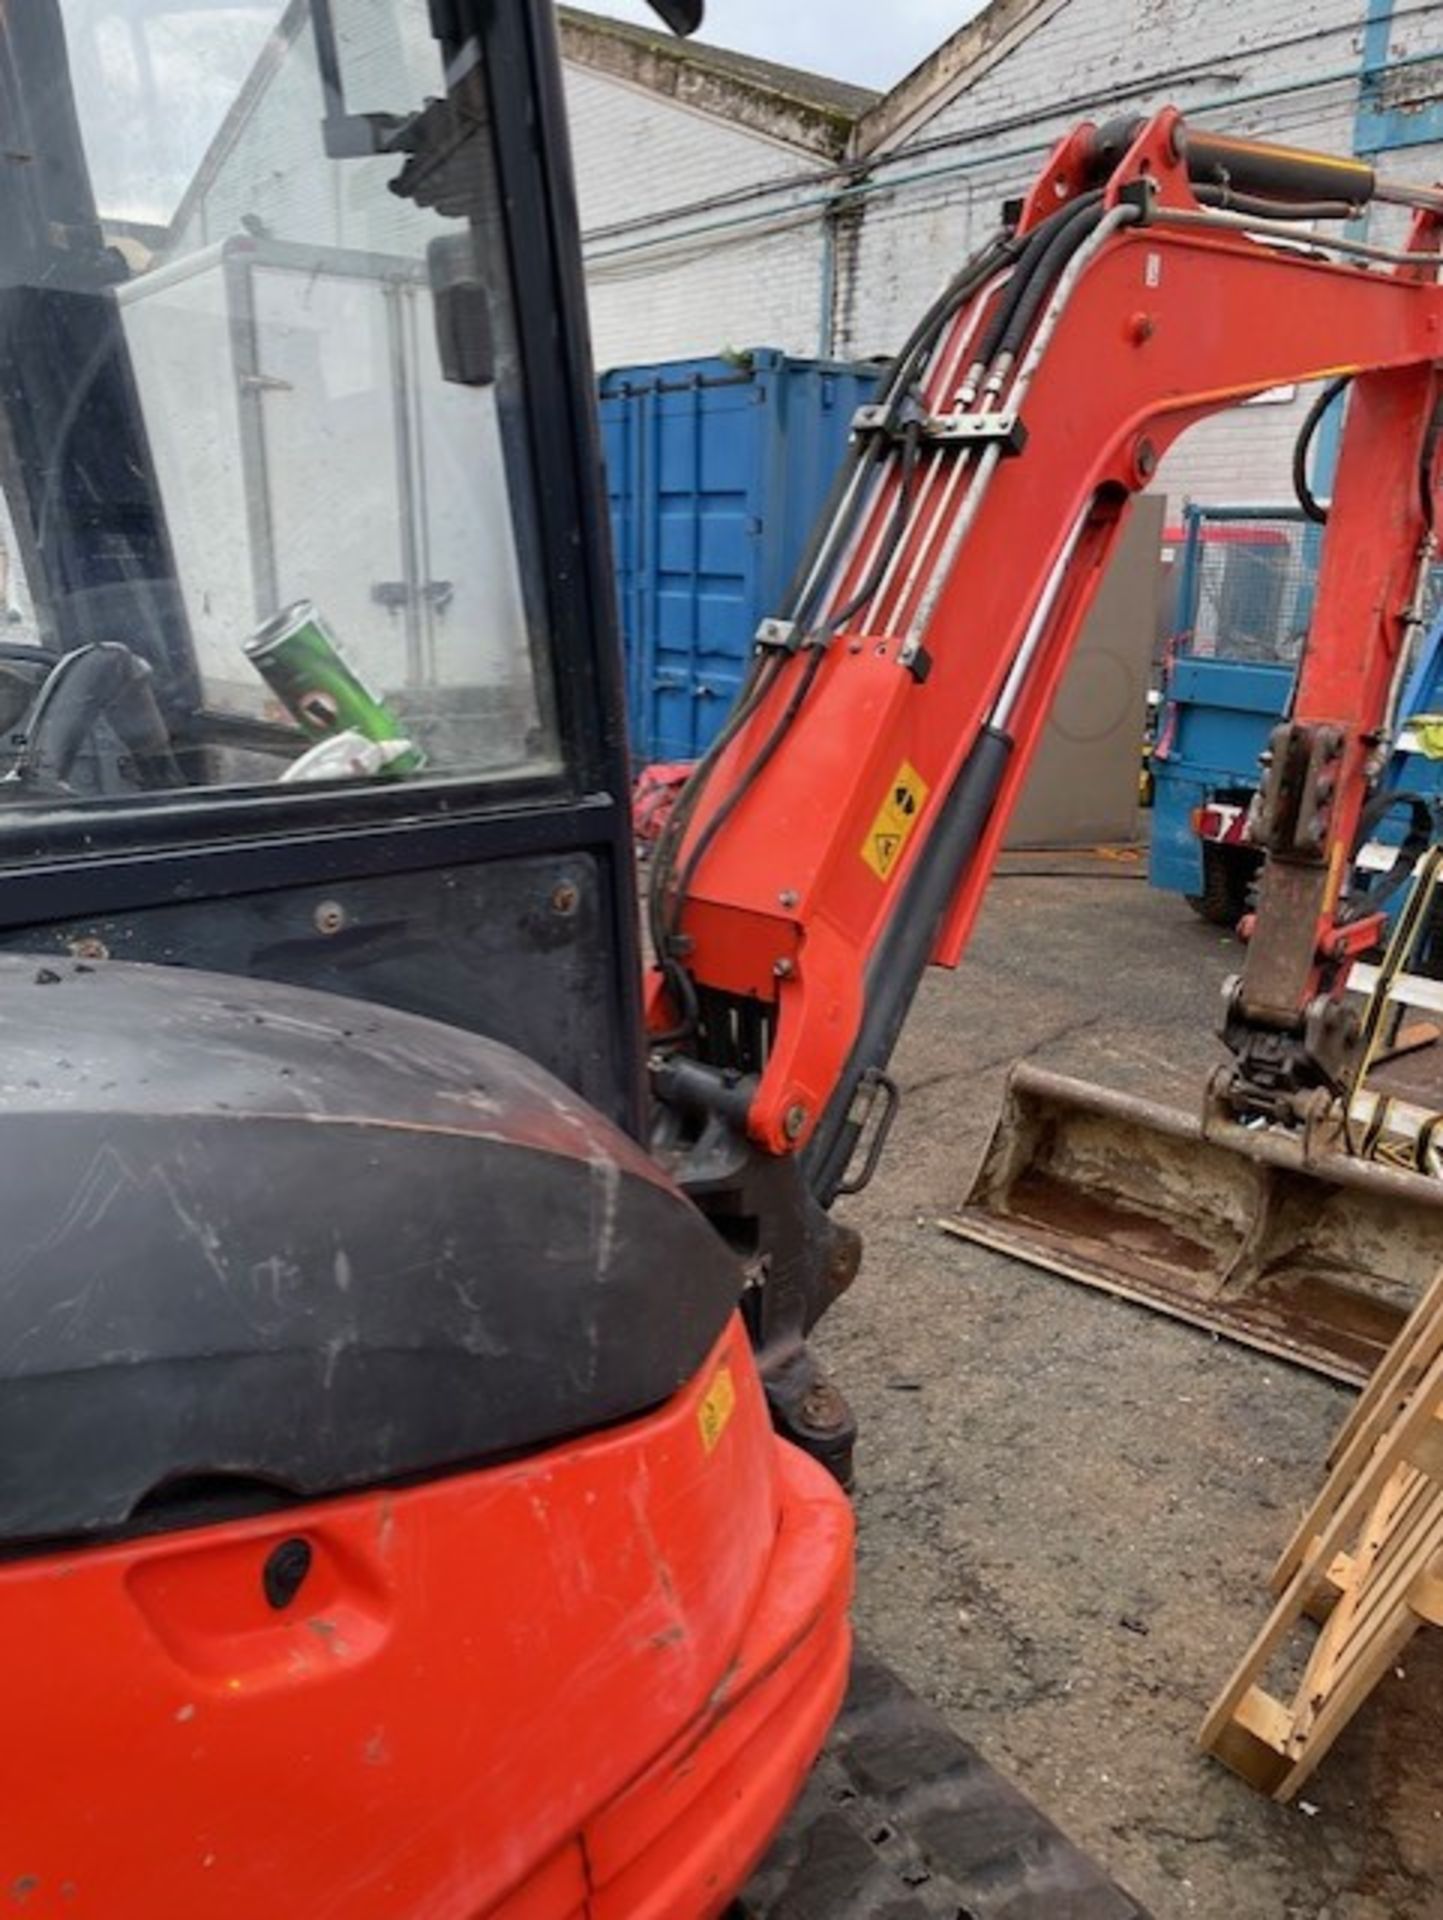 Kubota kx71  3 ton excavator 2015 in very decent condition all working always serviced 3k plus hours - Image 6 of 10